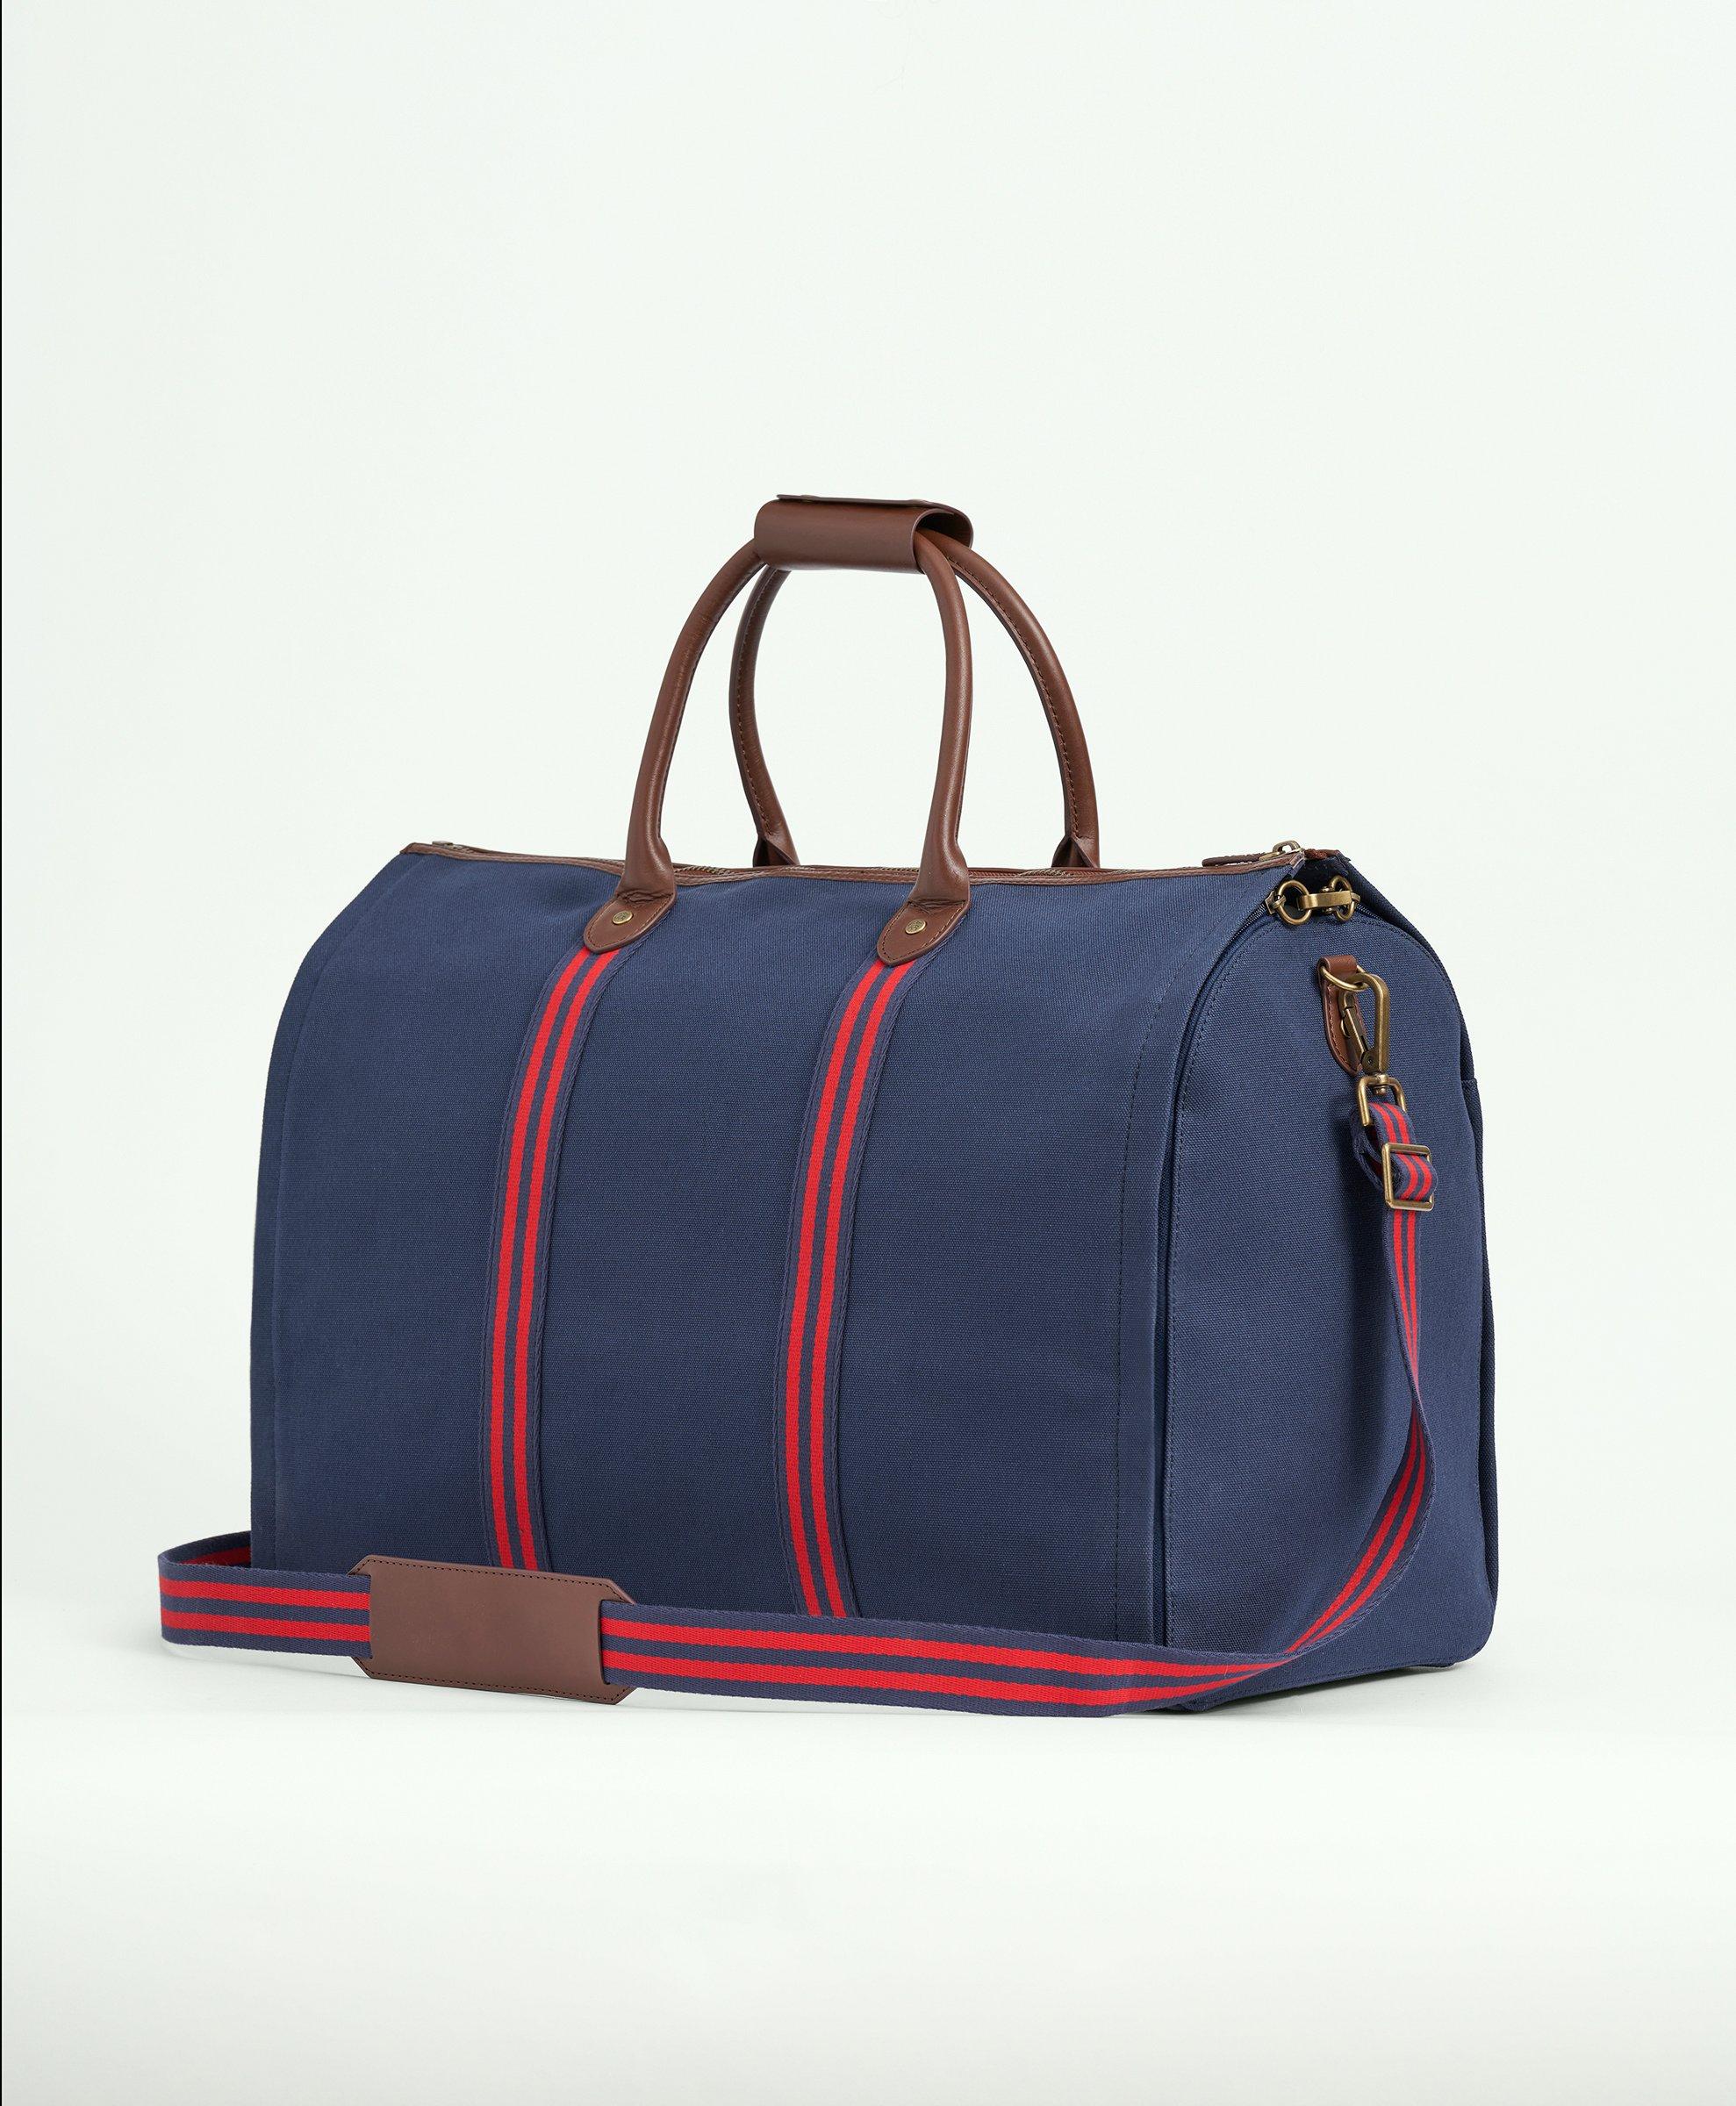 Shop Men's Leather Accessories & Bags | Brooks Brothers